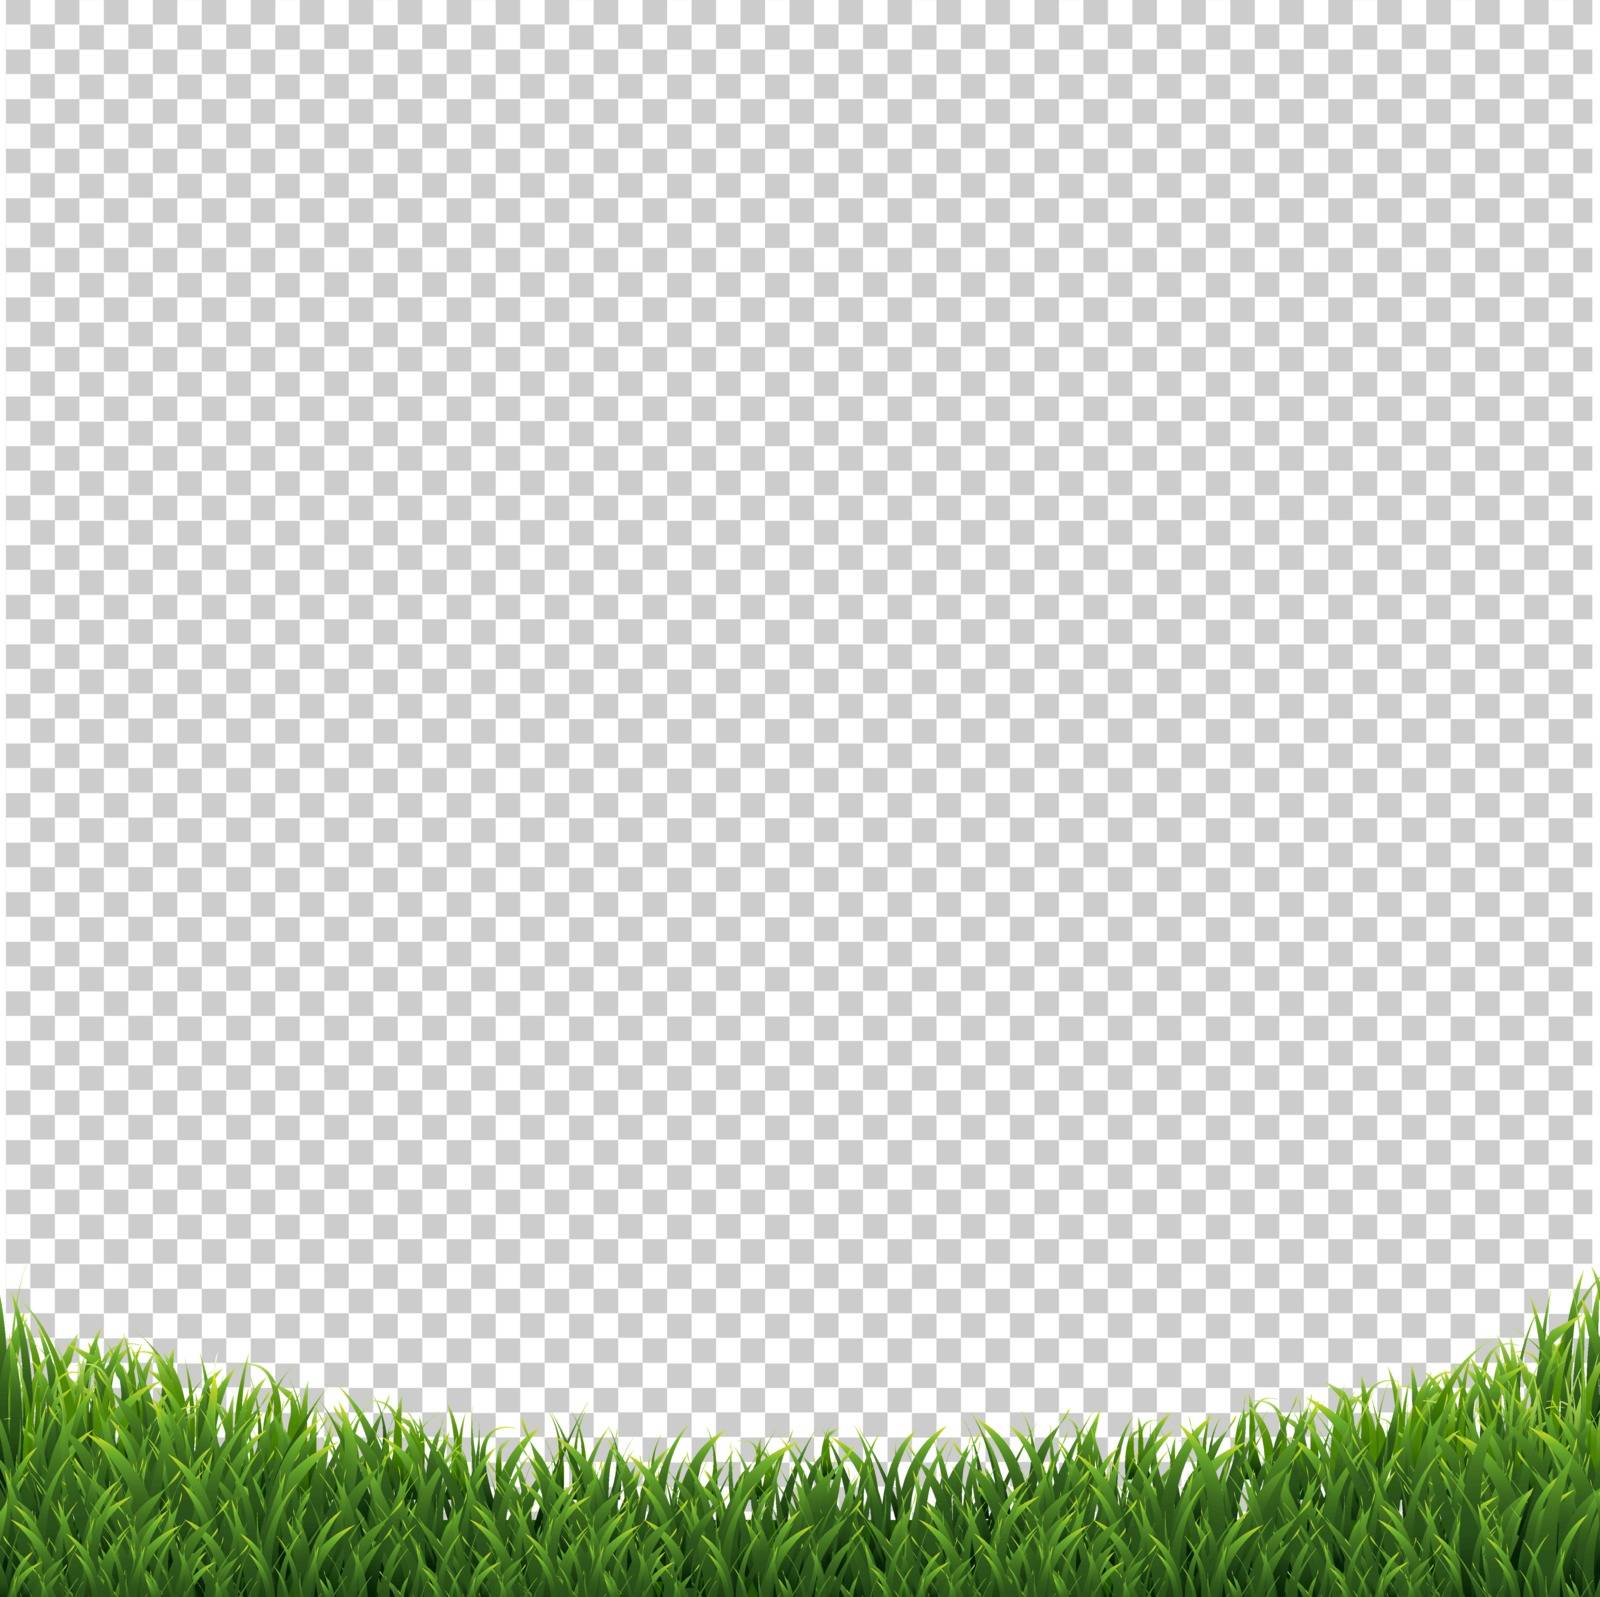 Grass Isolated Background Transparent Background by barbaliss